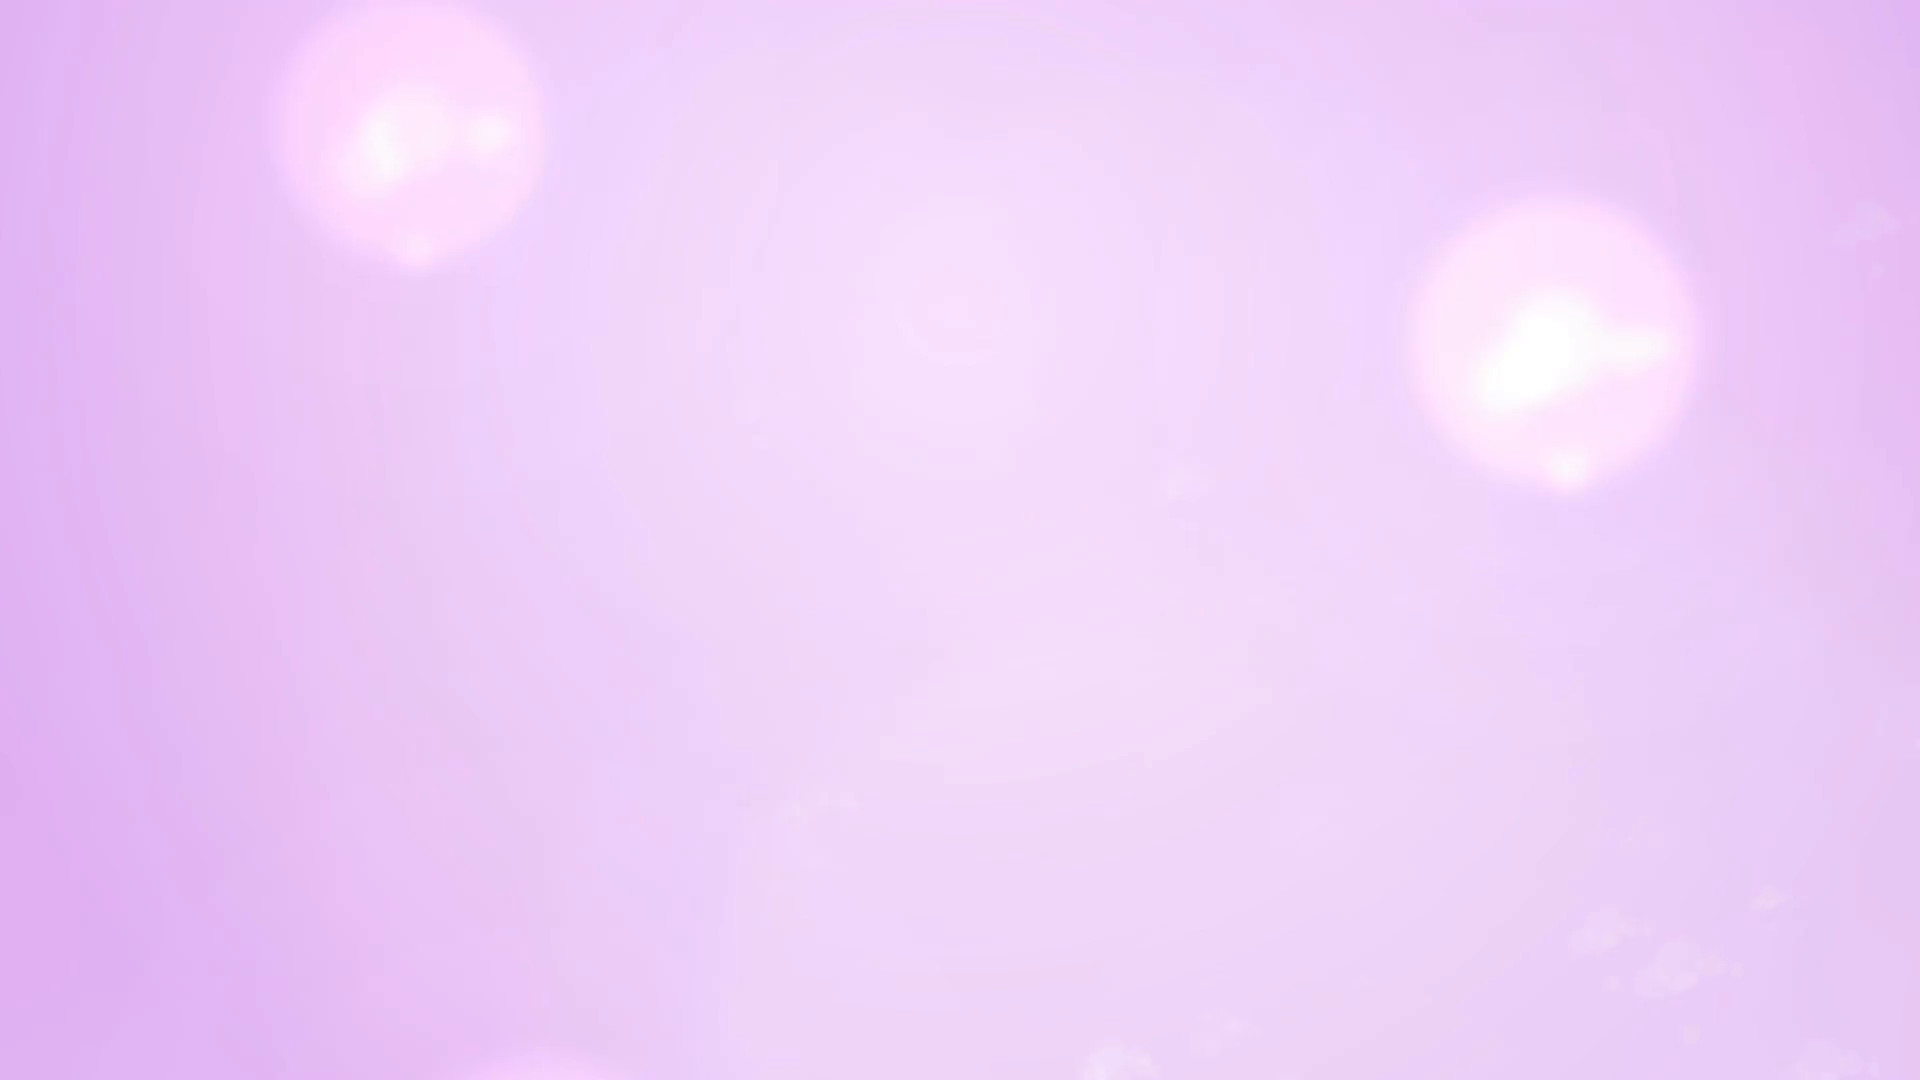 1920x1080 Subscription Library Bokeh Light Particles on Soft Pink Background as  Backdrop Motion Layer for Animation,  full